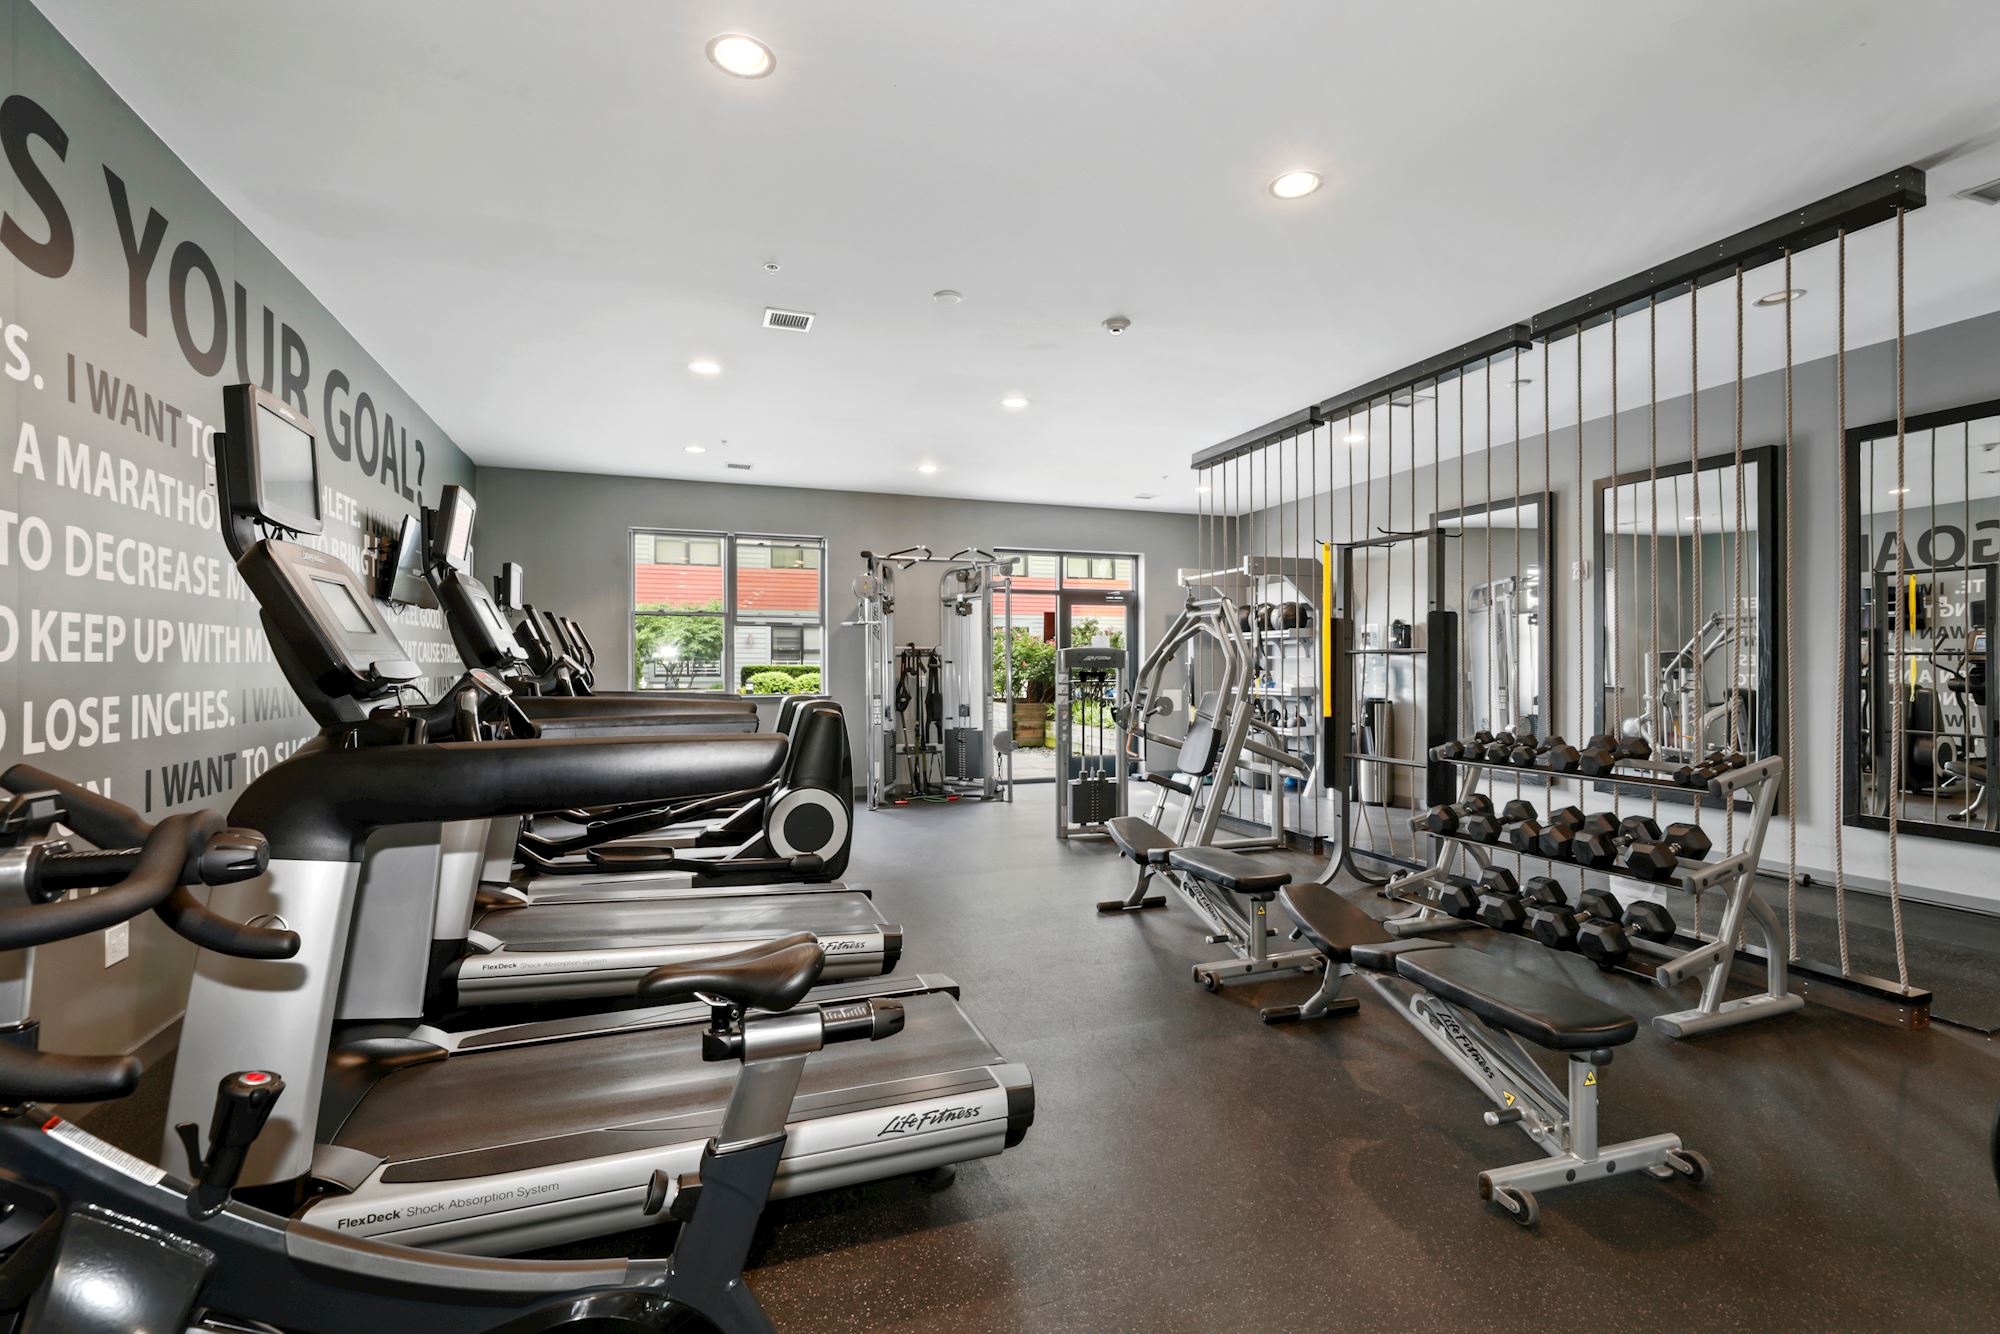 A 24/7 fitness center that motivates you